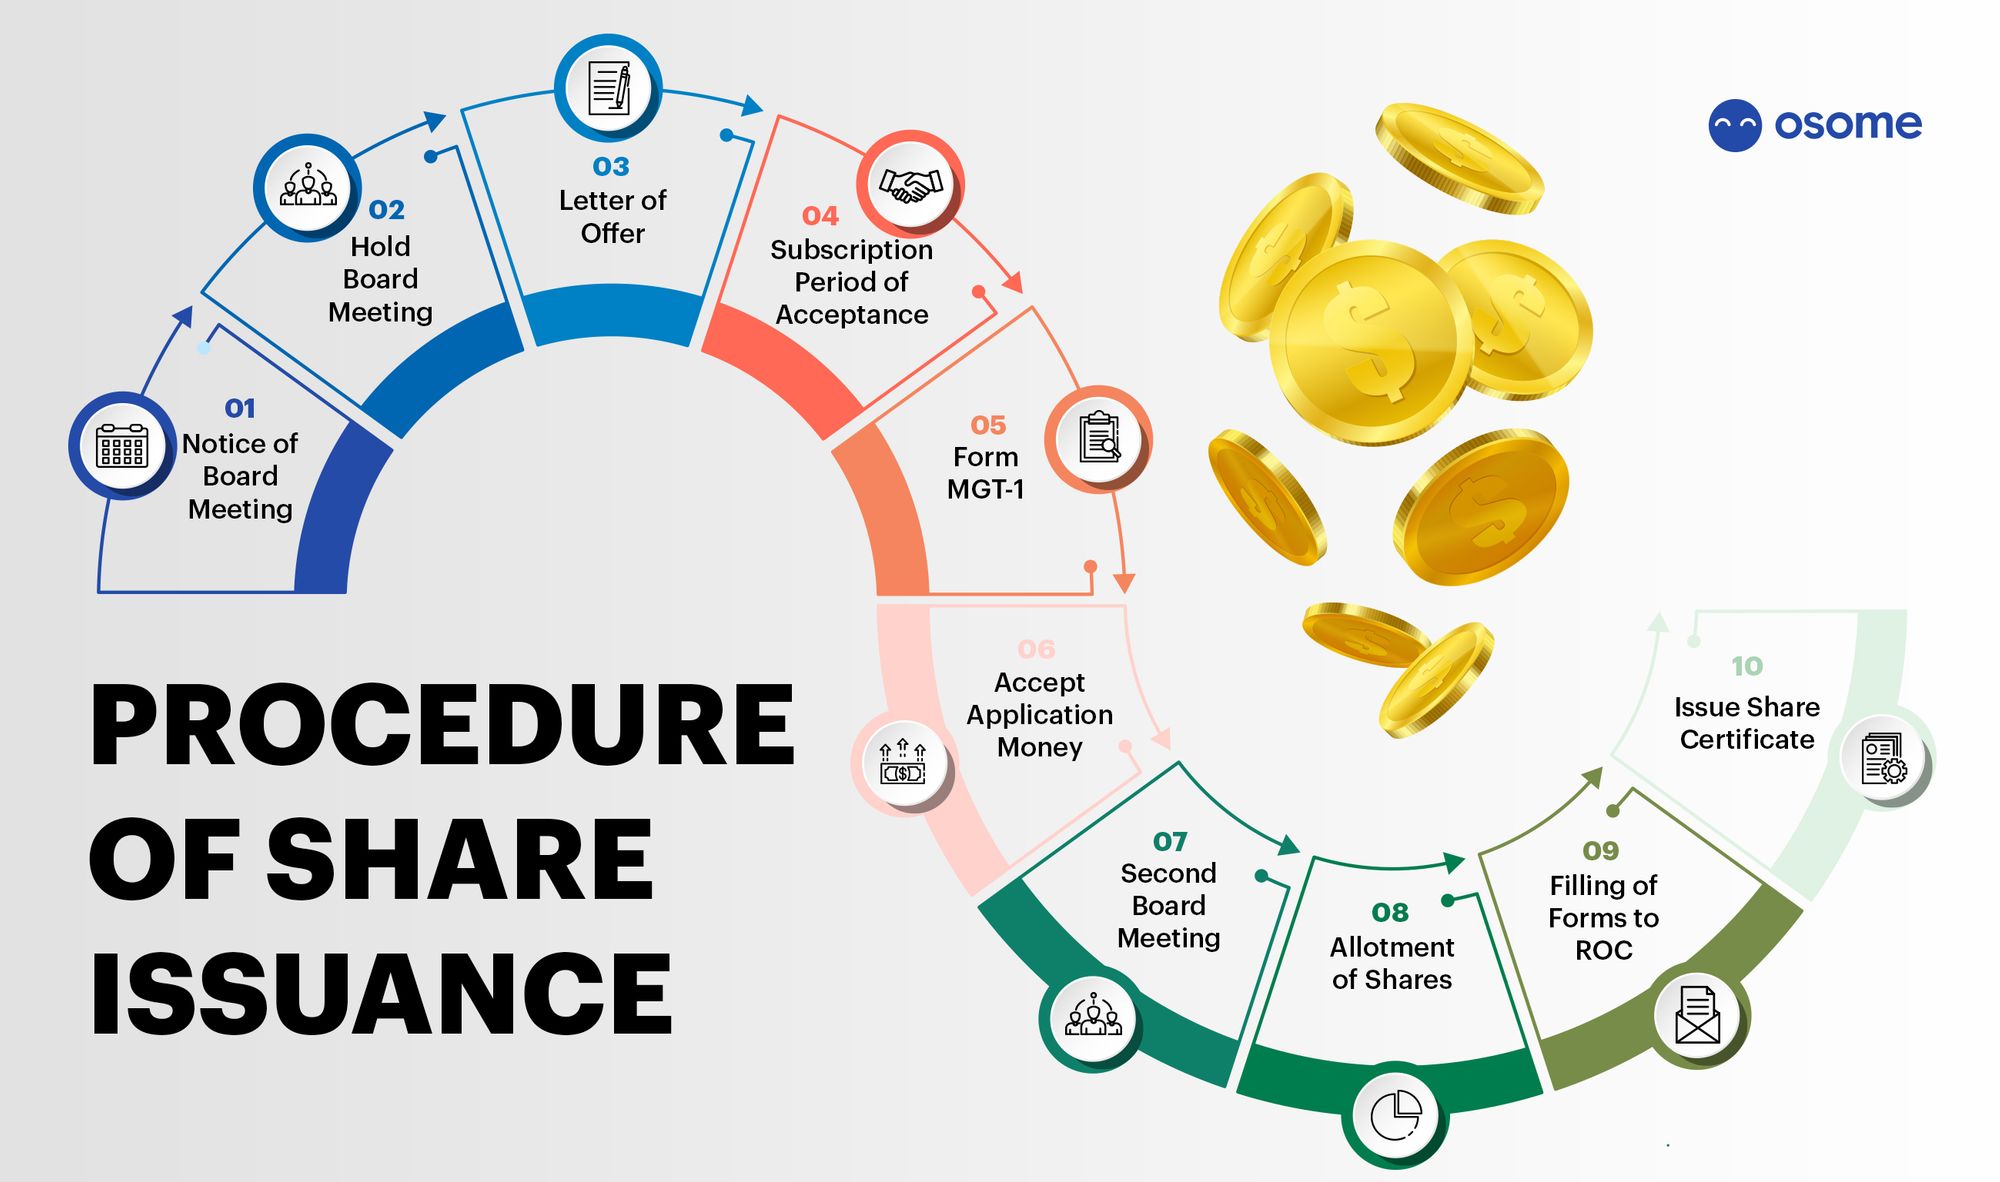 Procedure of Share Issuance